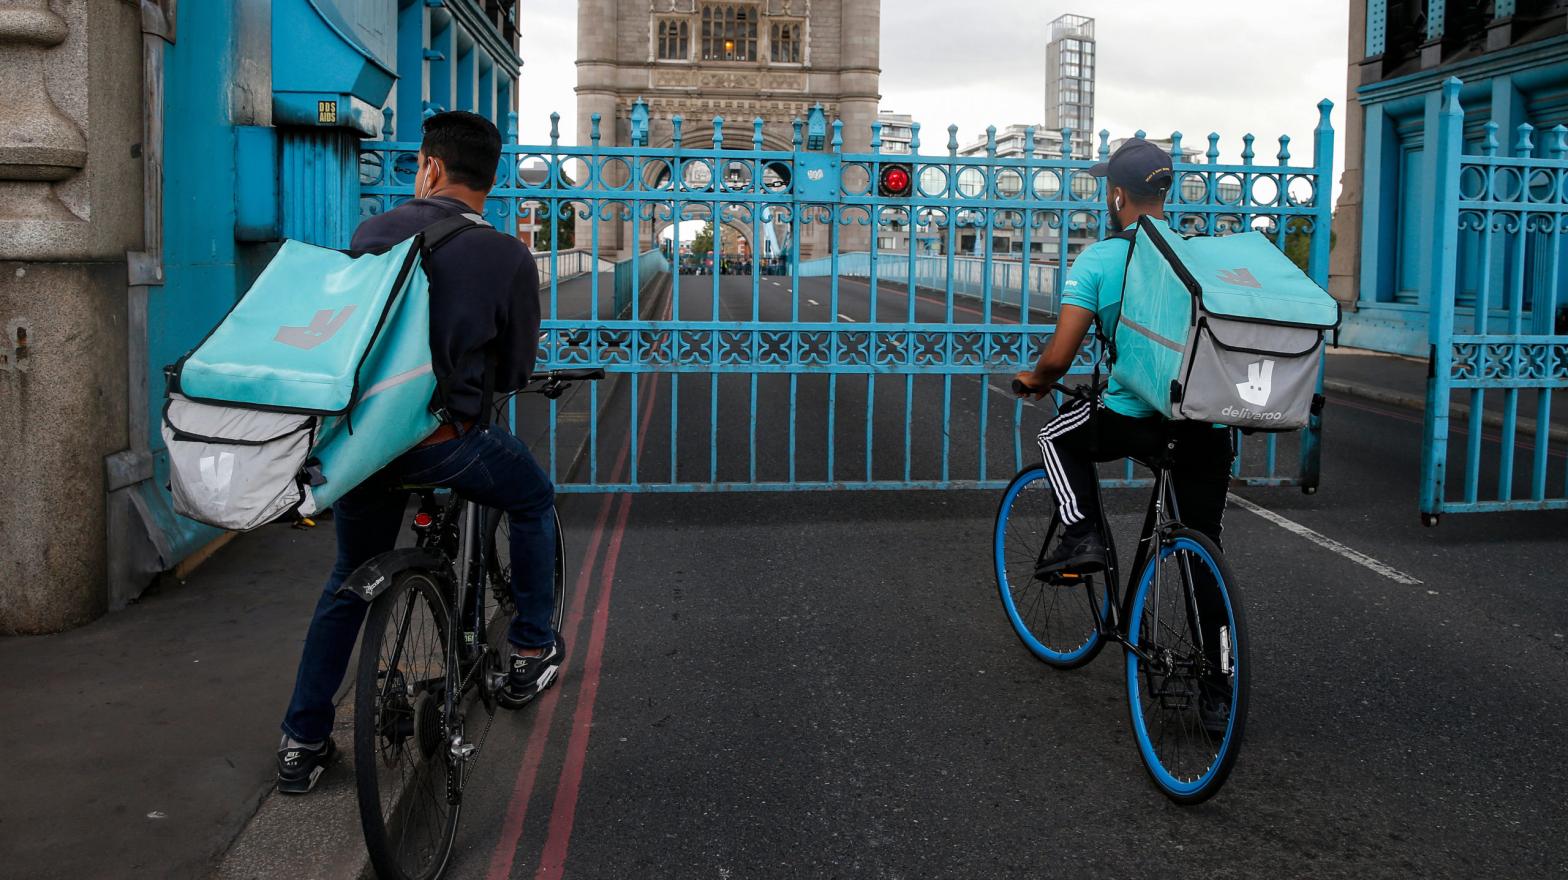 File photo of Deliveroo riders stuck on Tower Bridge in London, England. (Photo: Hollie Adams, Getty Images)